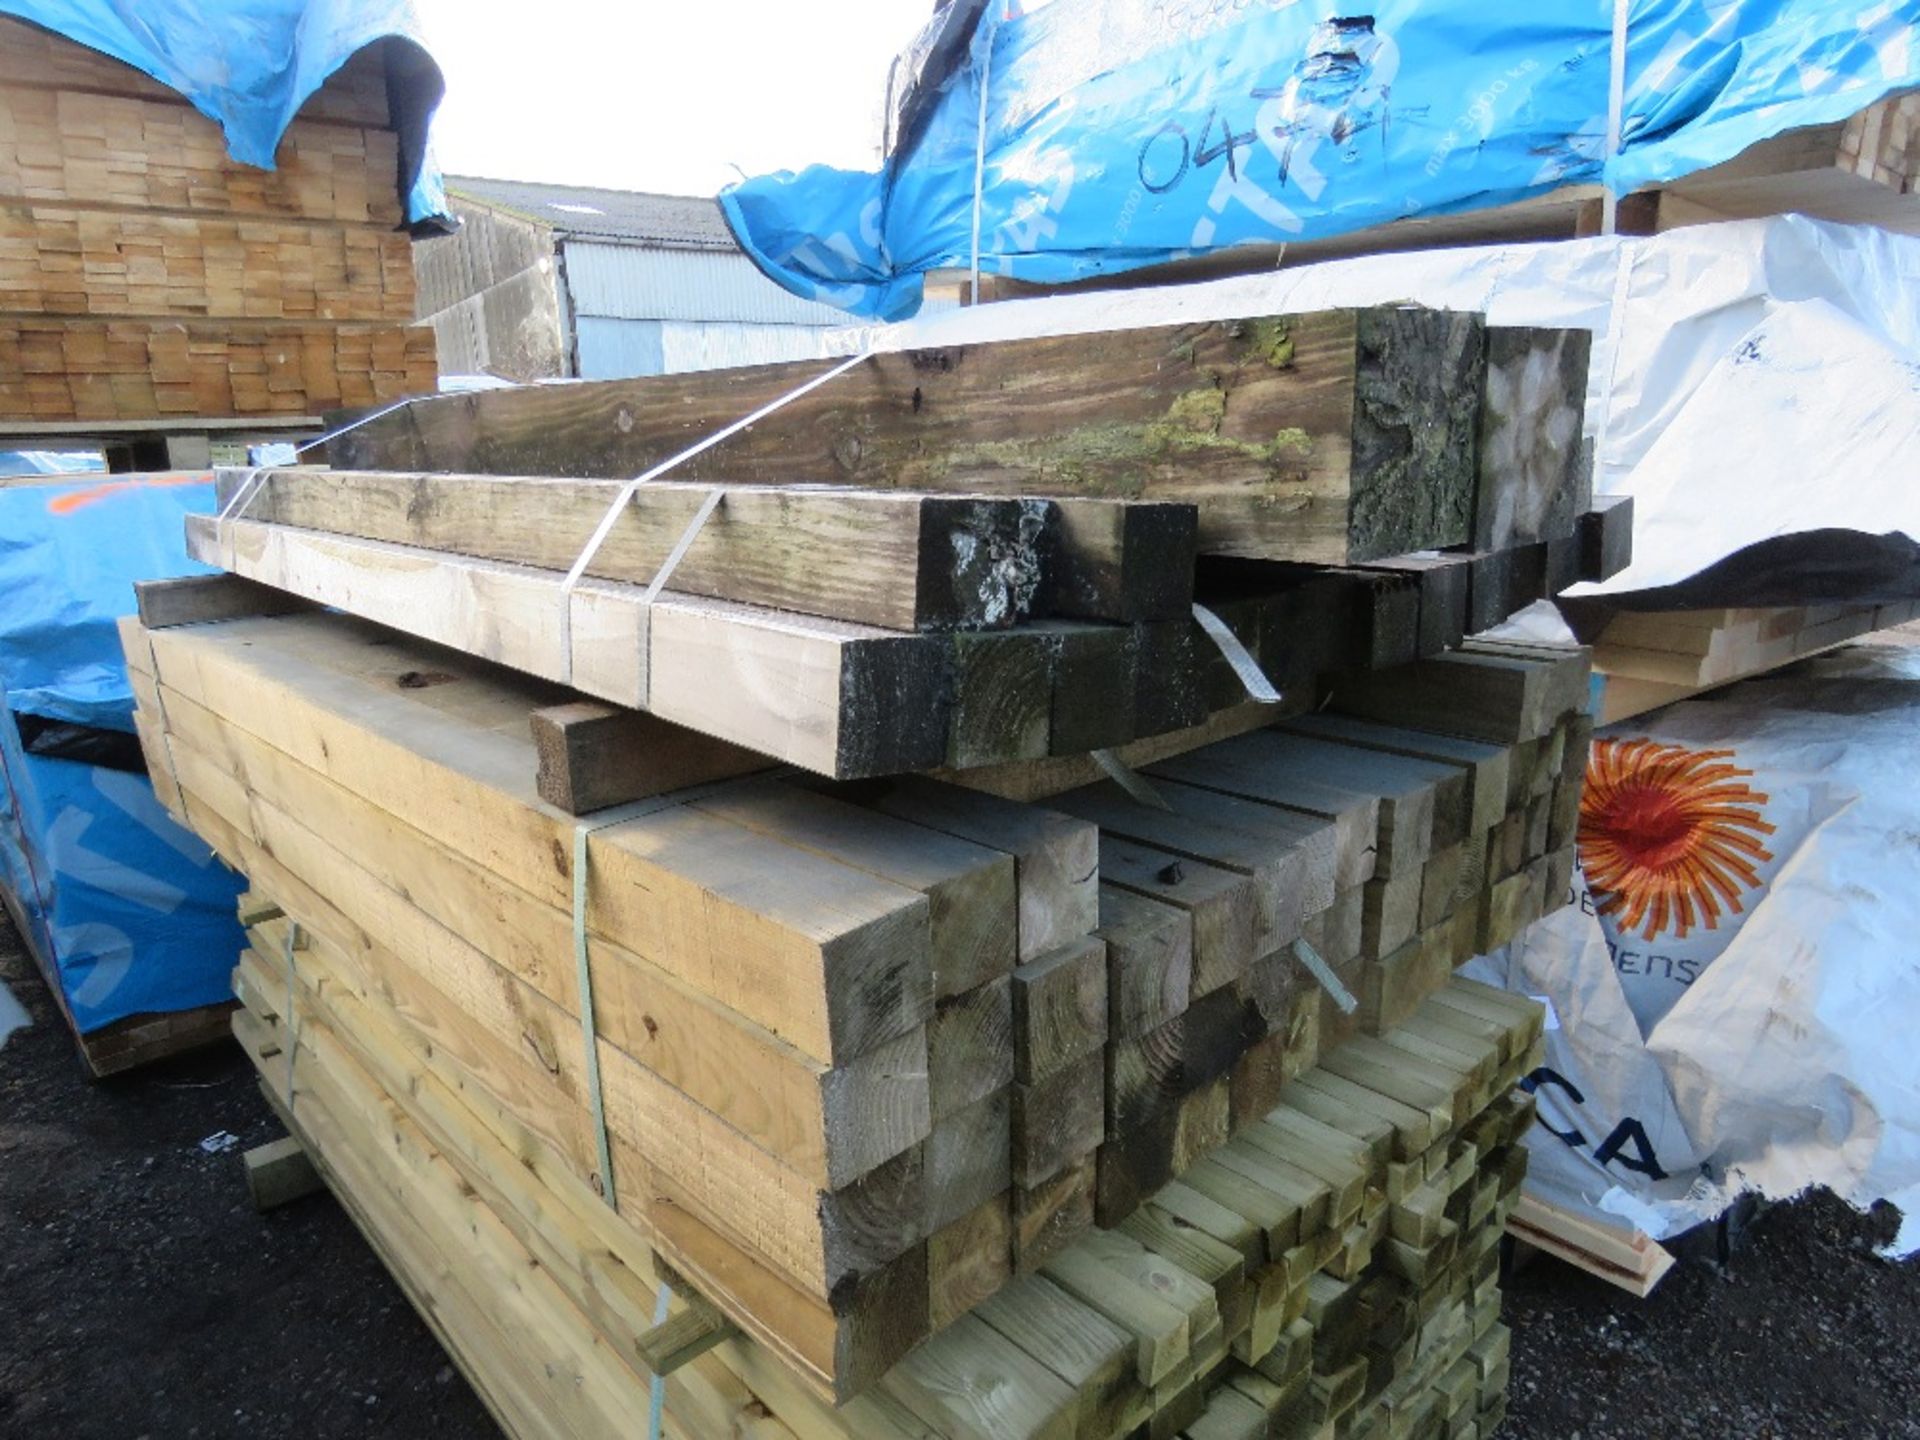 2 XBUNDLES OF TIMBER POSTS MAINLY 80MM X 80MM X 1.8M APPROX.